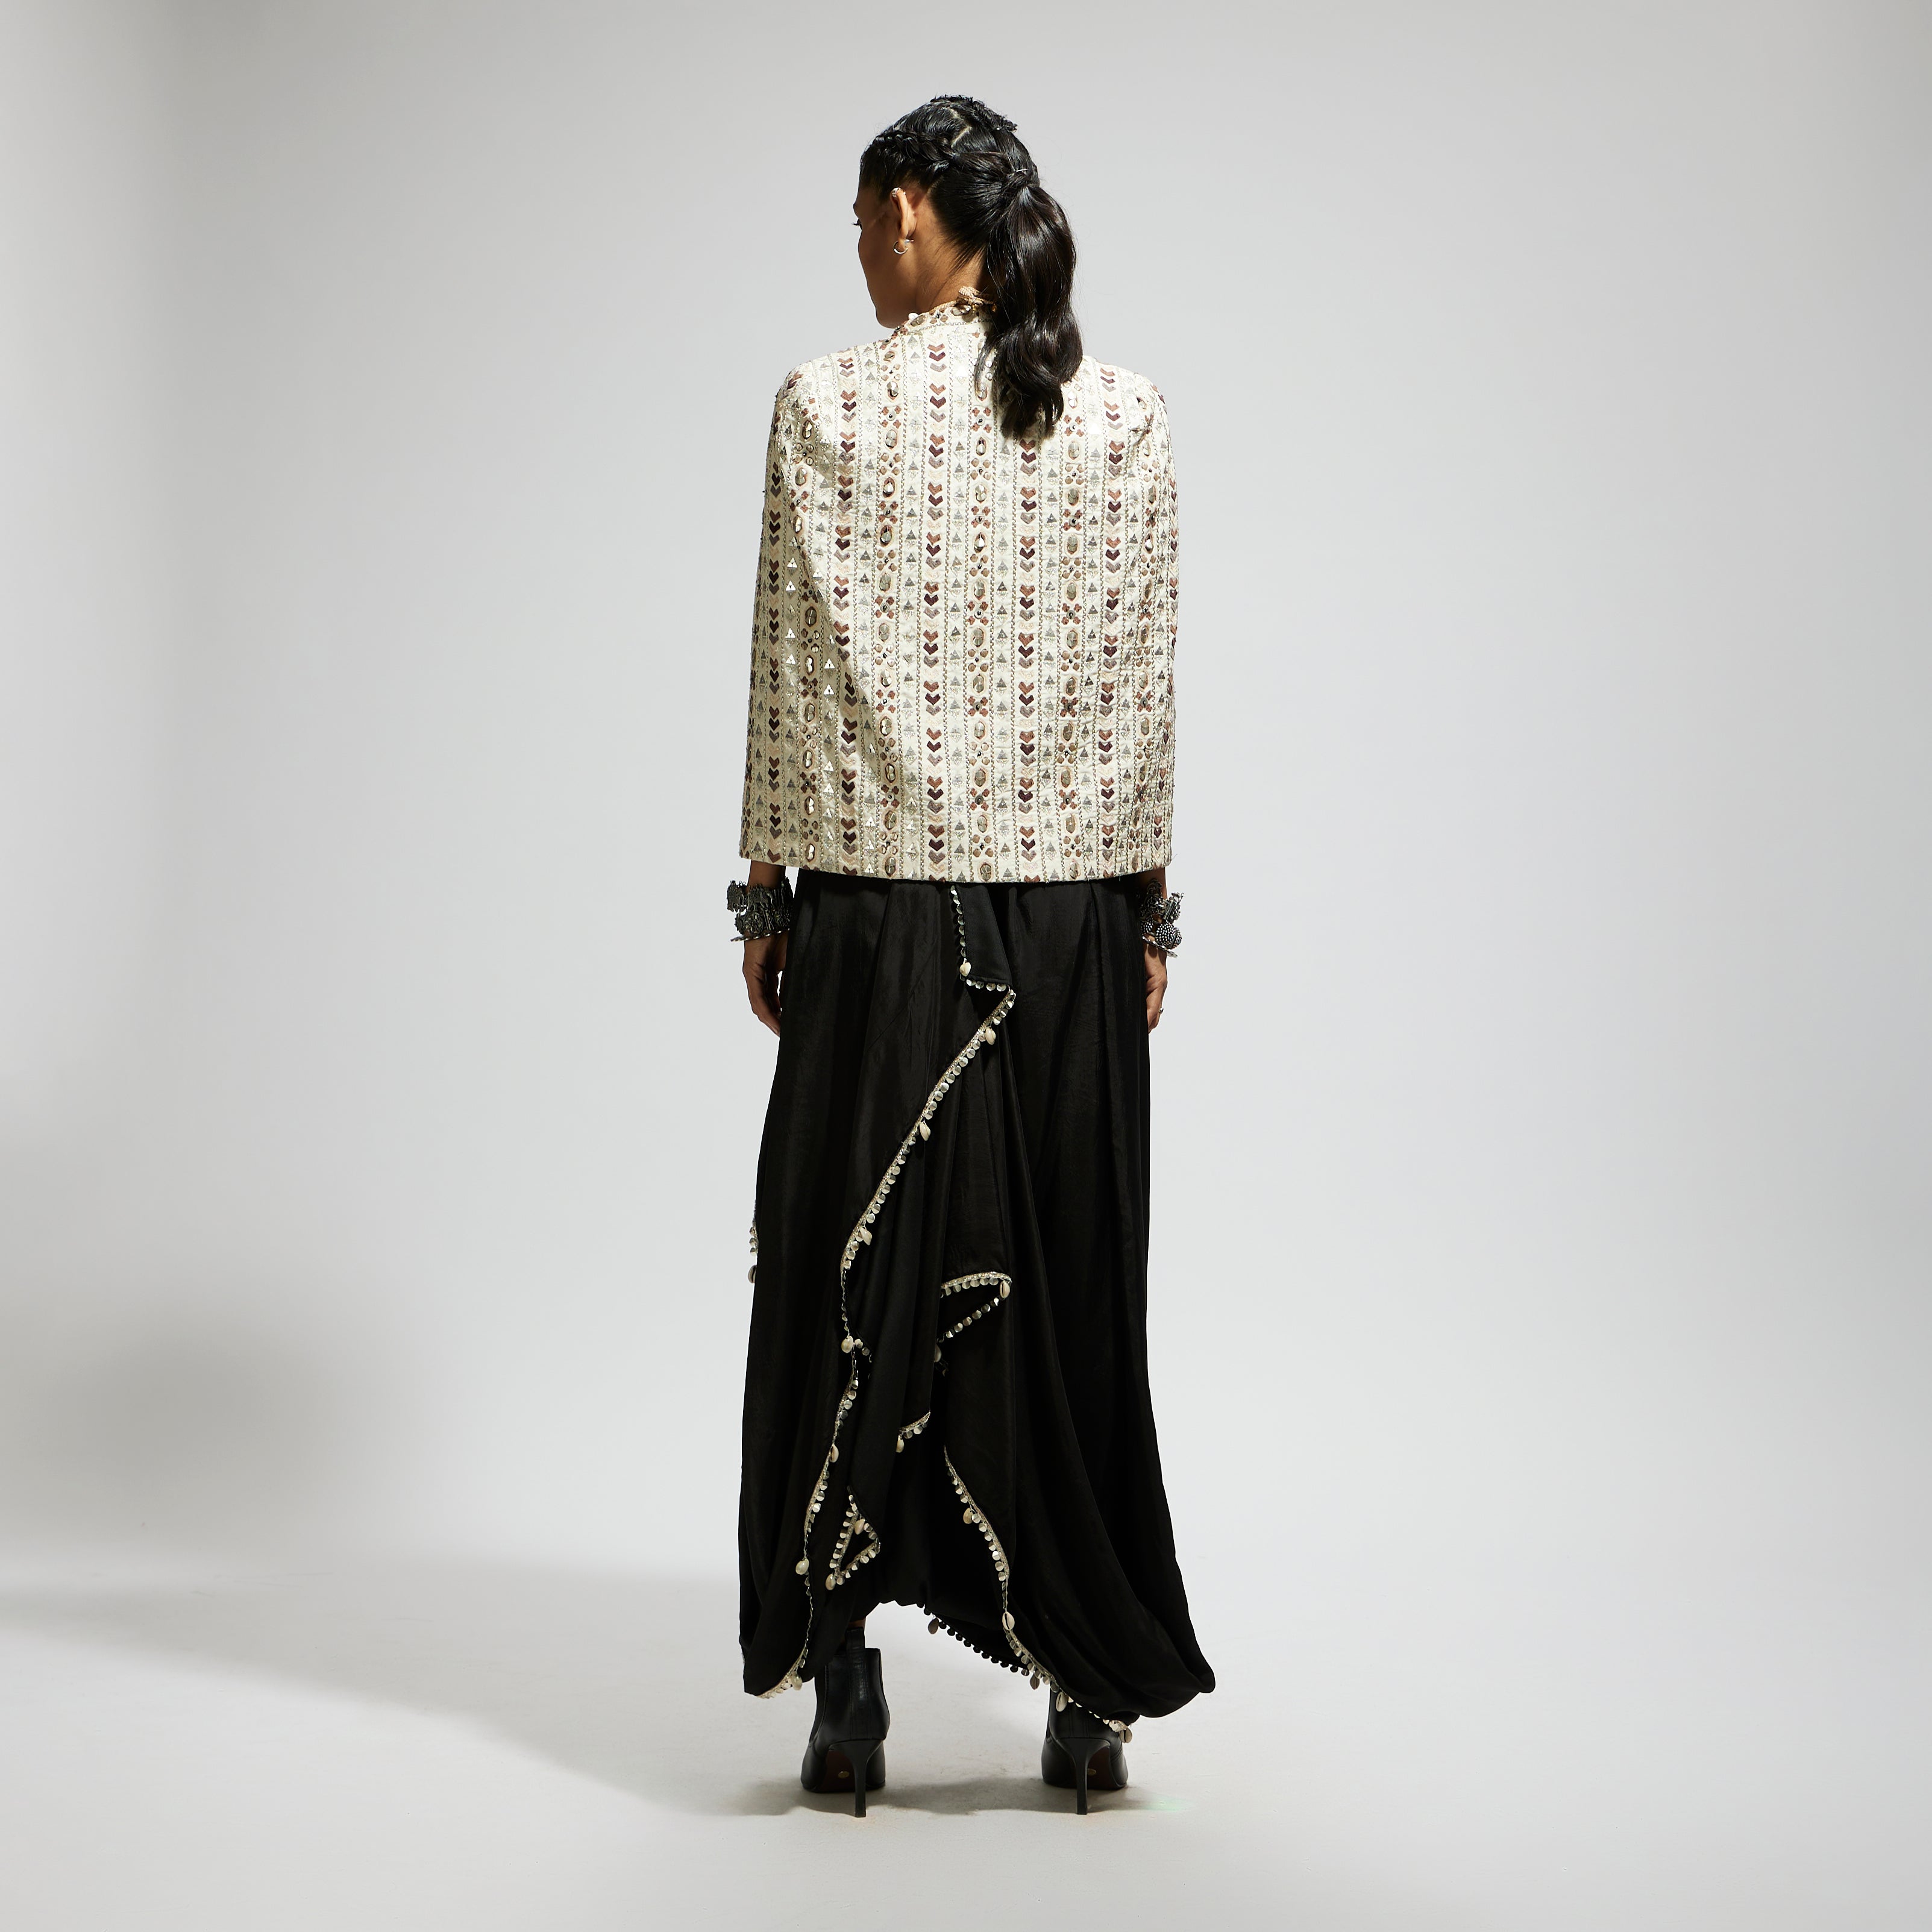 IVORY EMBELLISHED CAPE JACKET PAIRED WITH TEXTURED BUSTIER AND DRAPE SKIRT